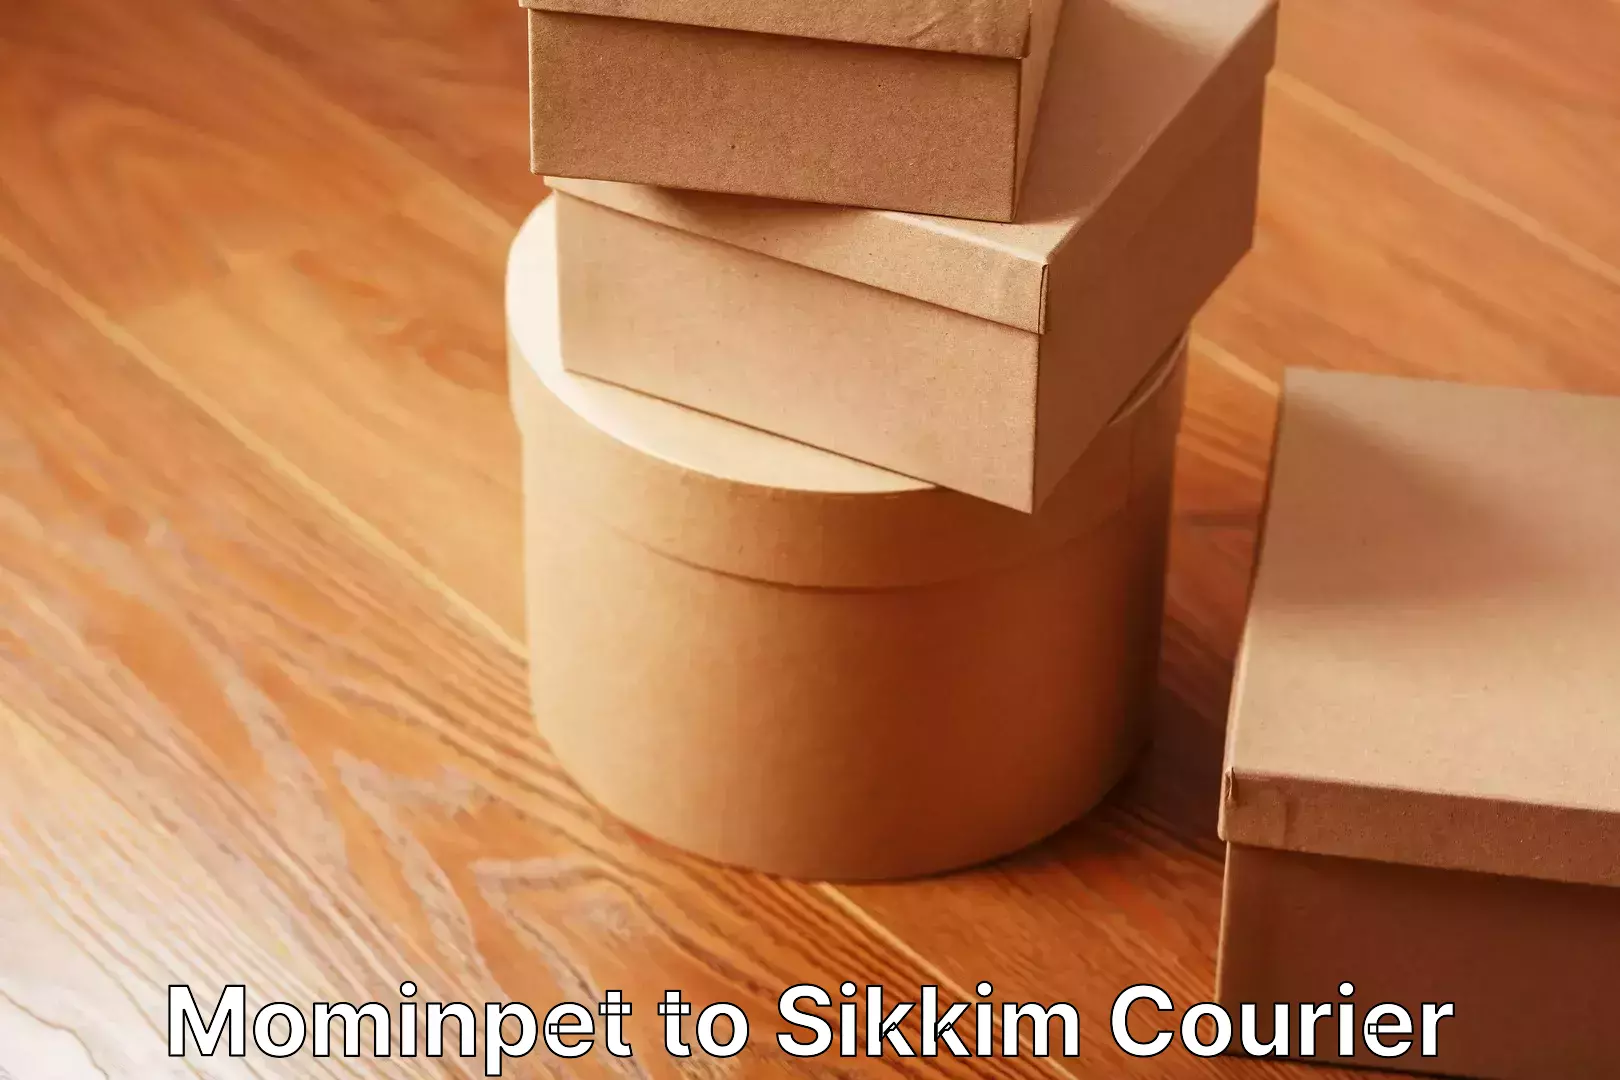 Moving and packing experts Mominpet to Sikkim